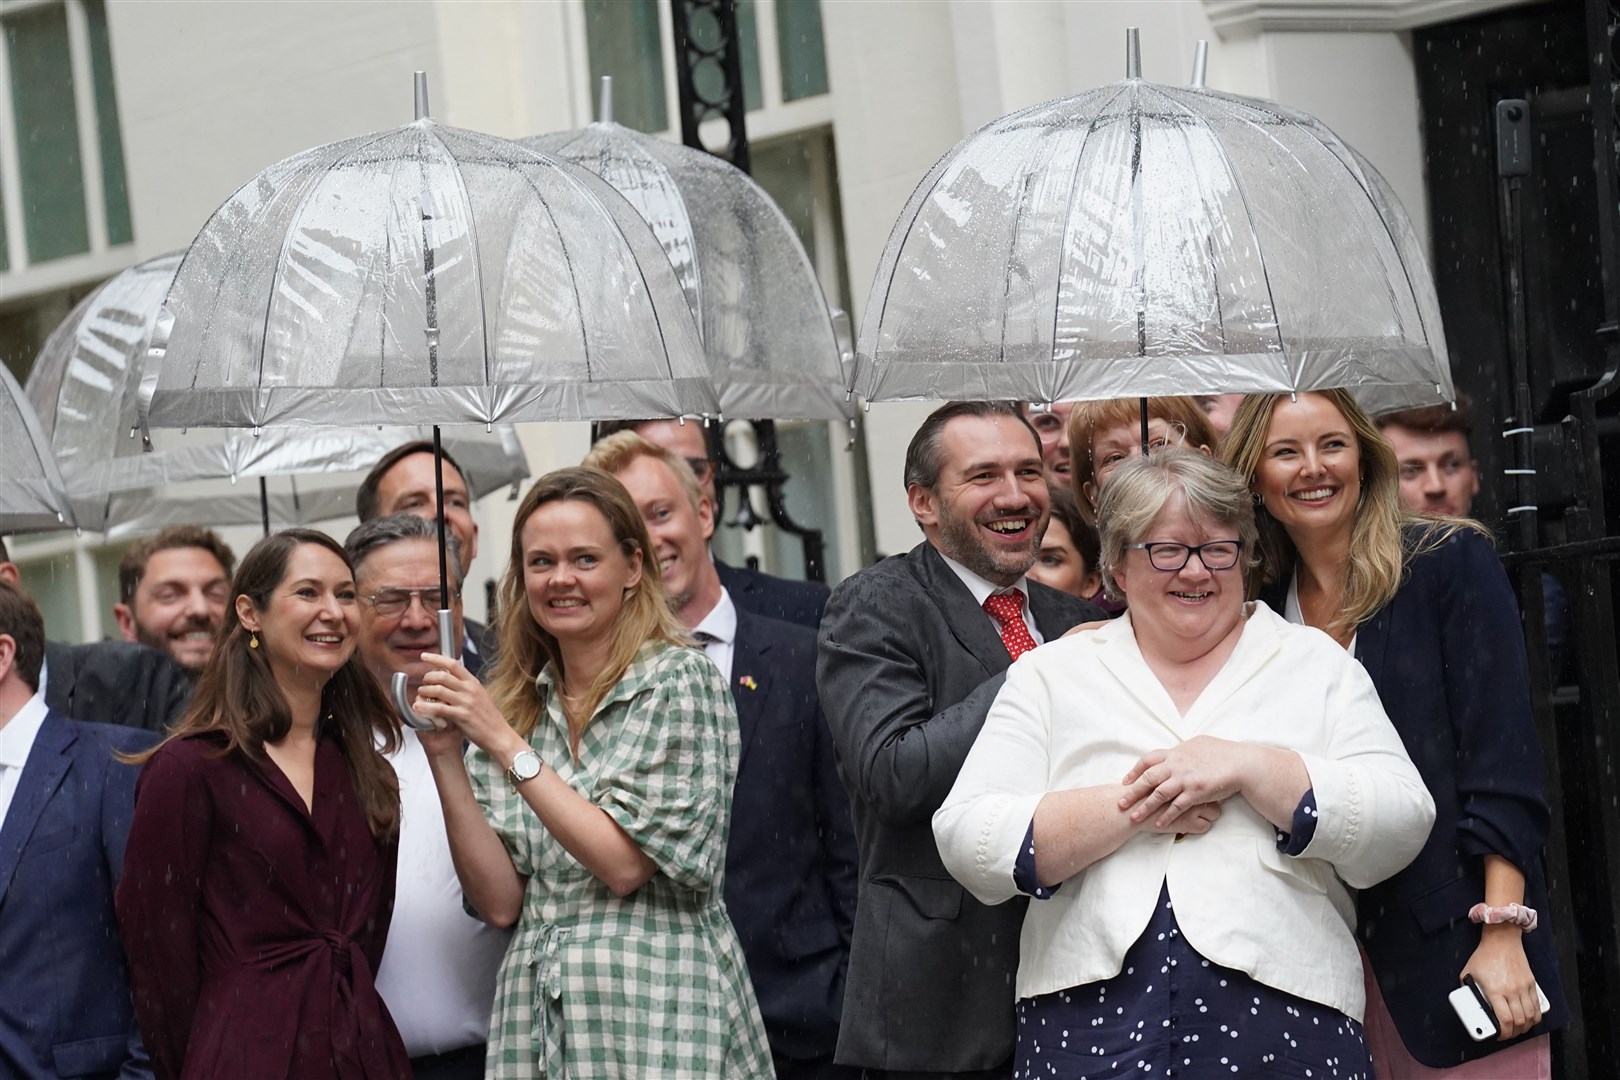 Therese Coffey (right) grins beneath an umbrella ahead of Liz Truss’ arrival at Downing Street on Tuesday (Stefan Rousseau/PA).